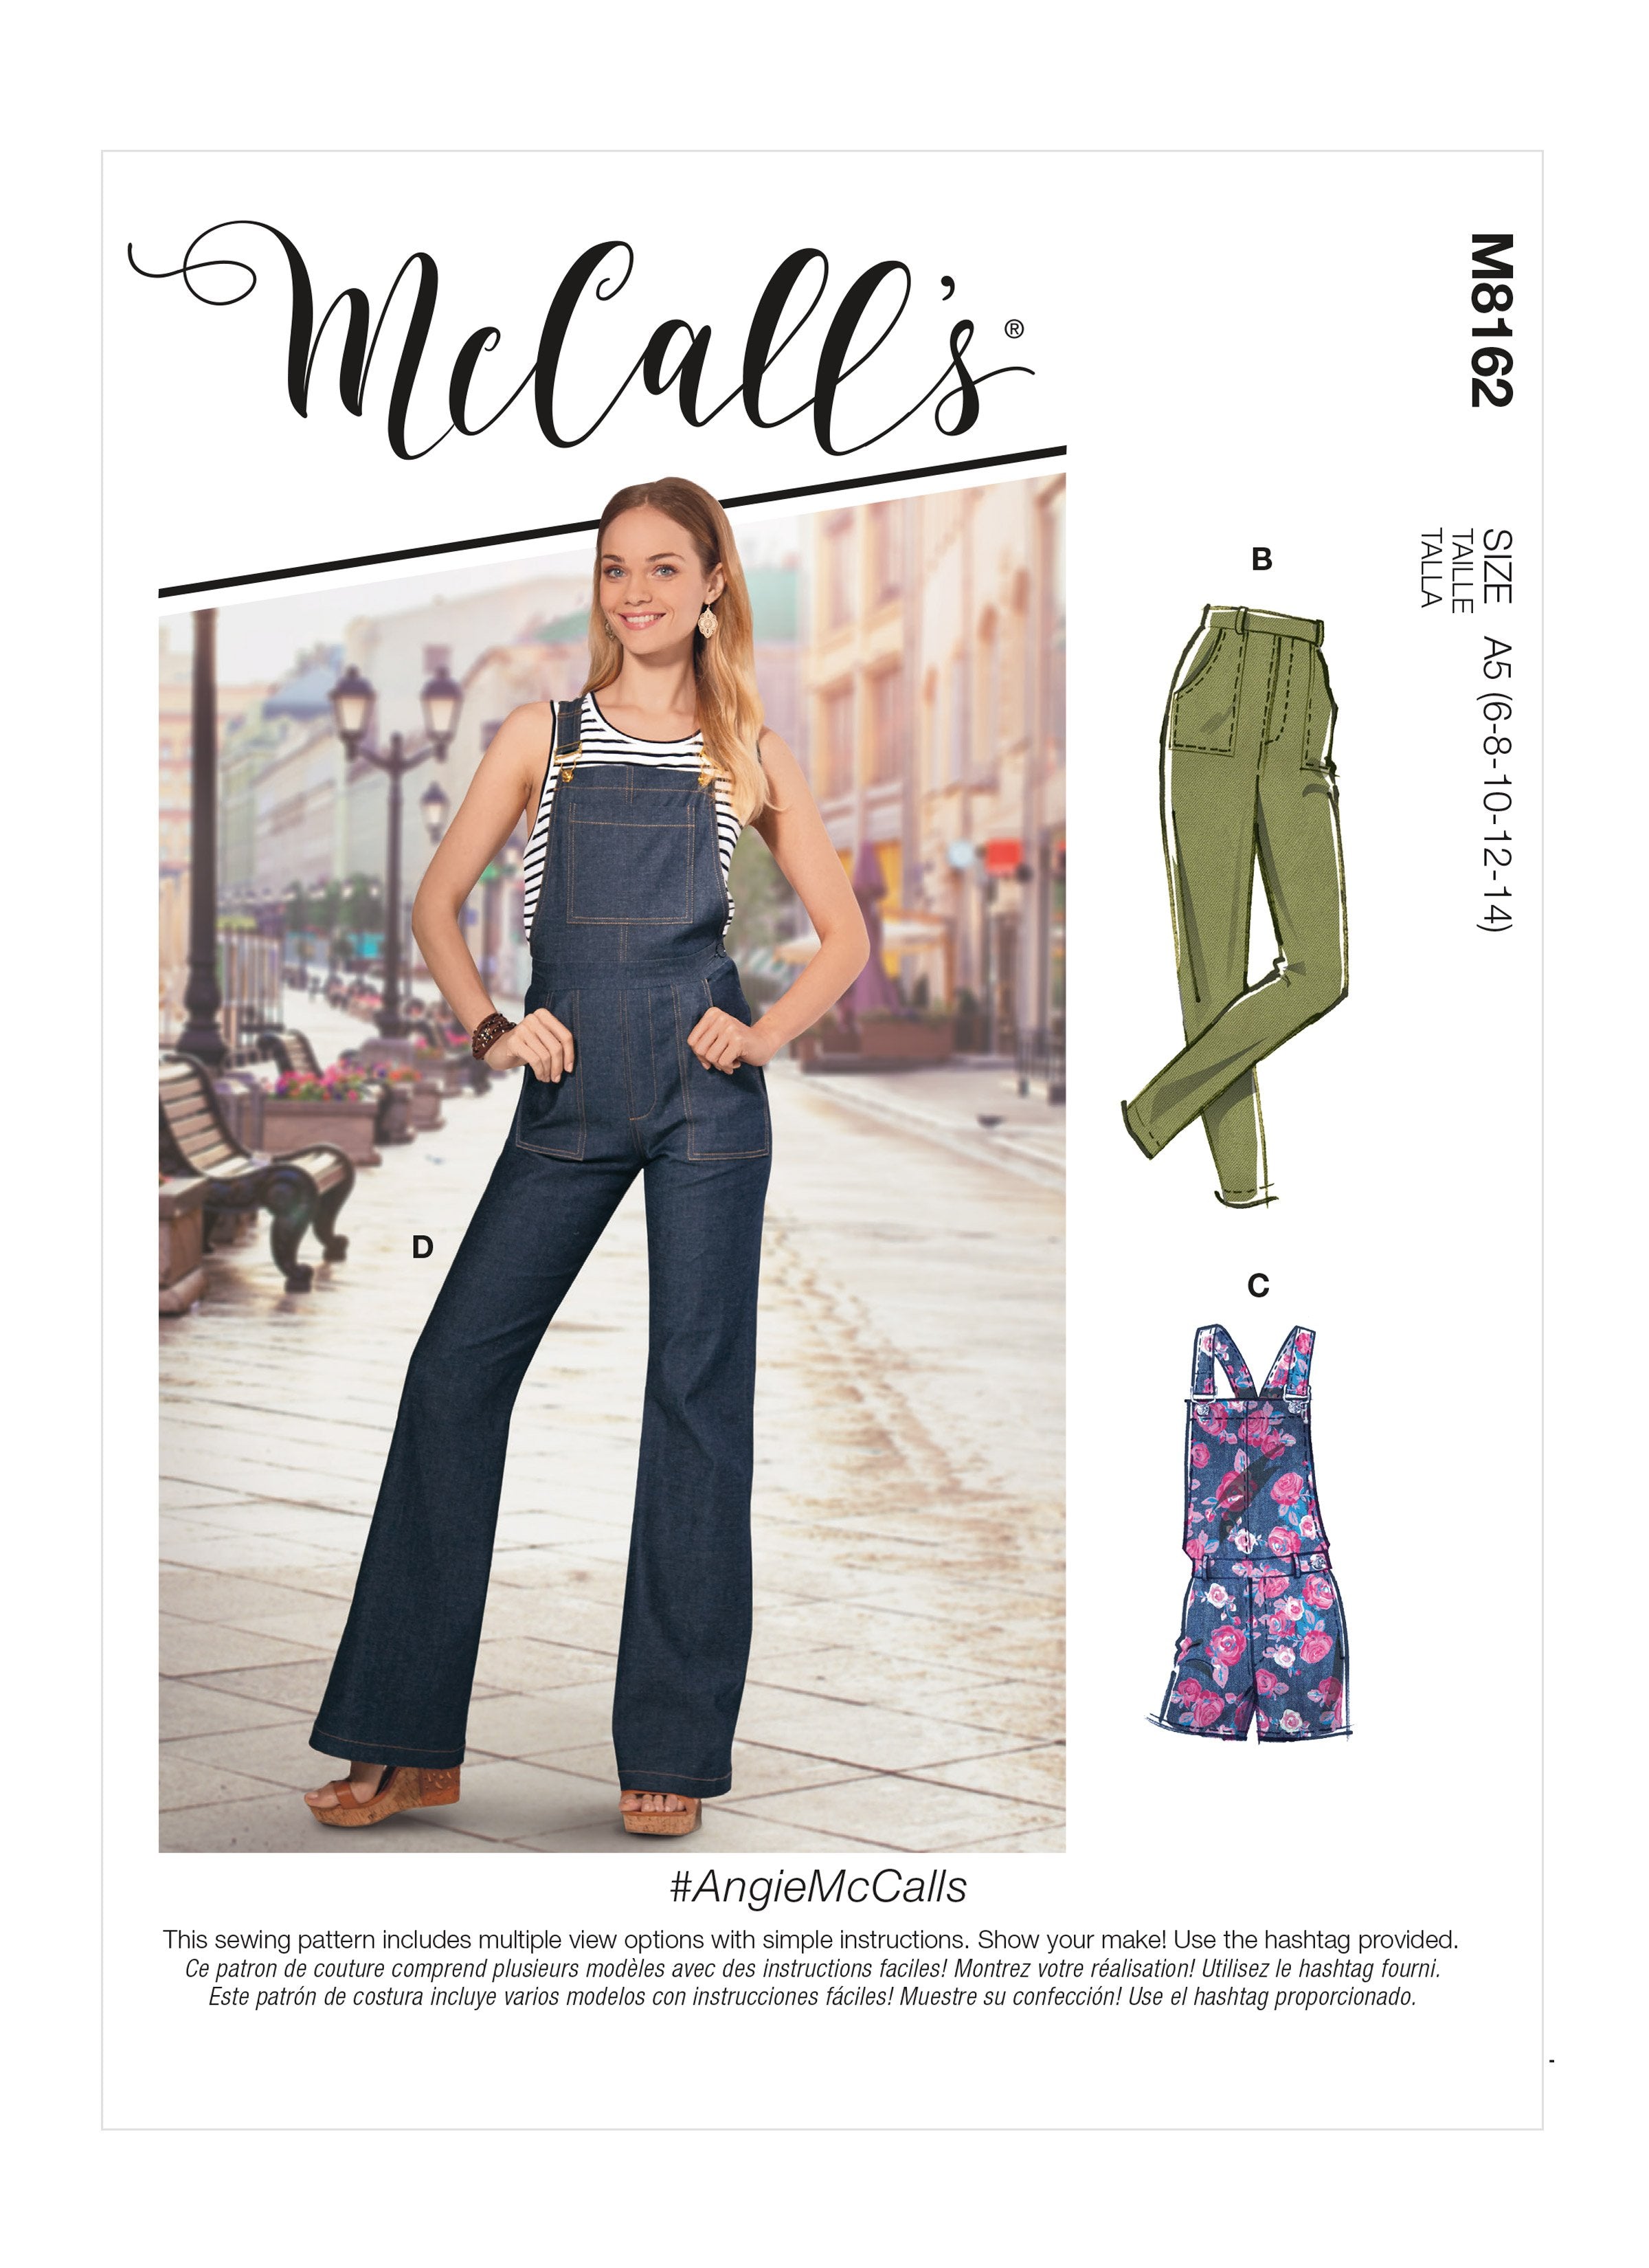 McCall's 8162 Misses' Flared Jeans, Overalls, Skinny Jeans & Shortalls pattern from Jaycotts Sewing Supplies